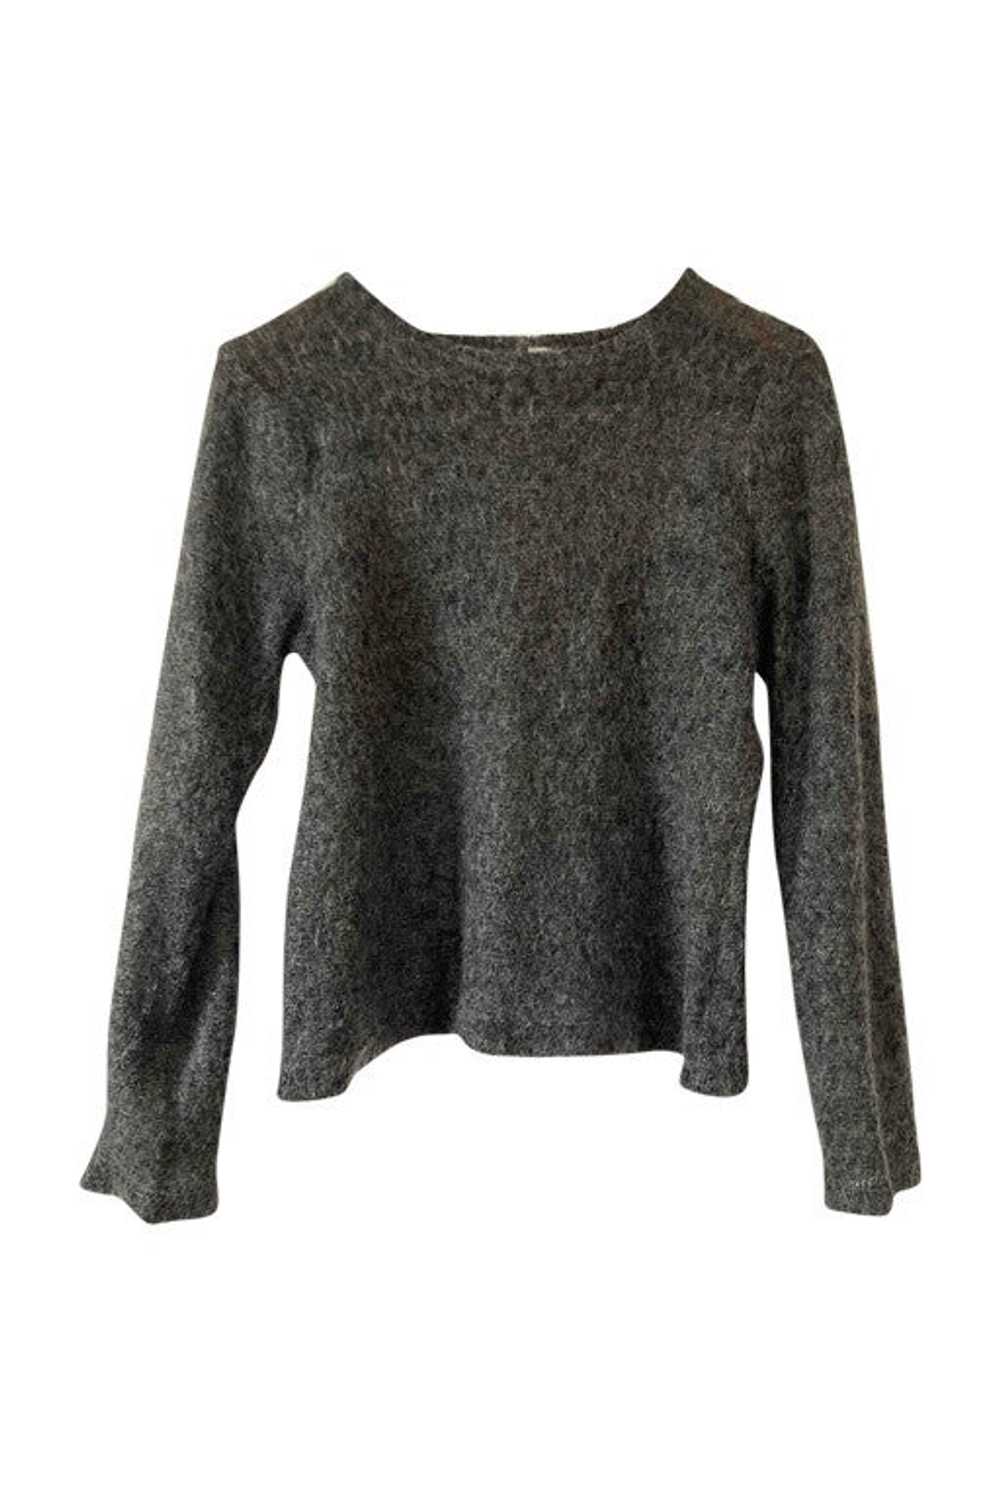 Mohair sweater - 90s mohair sweater Very fine and… - image 1